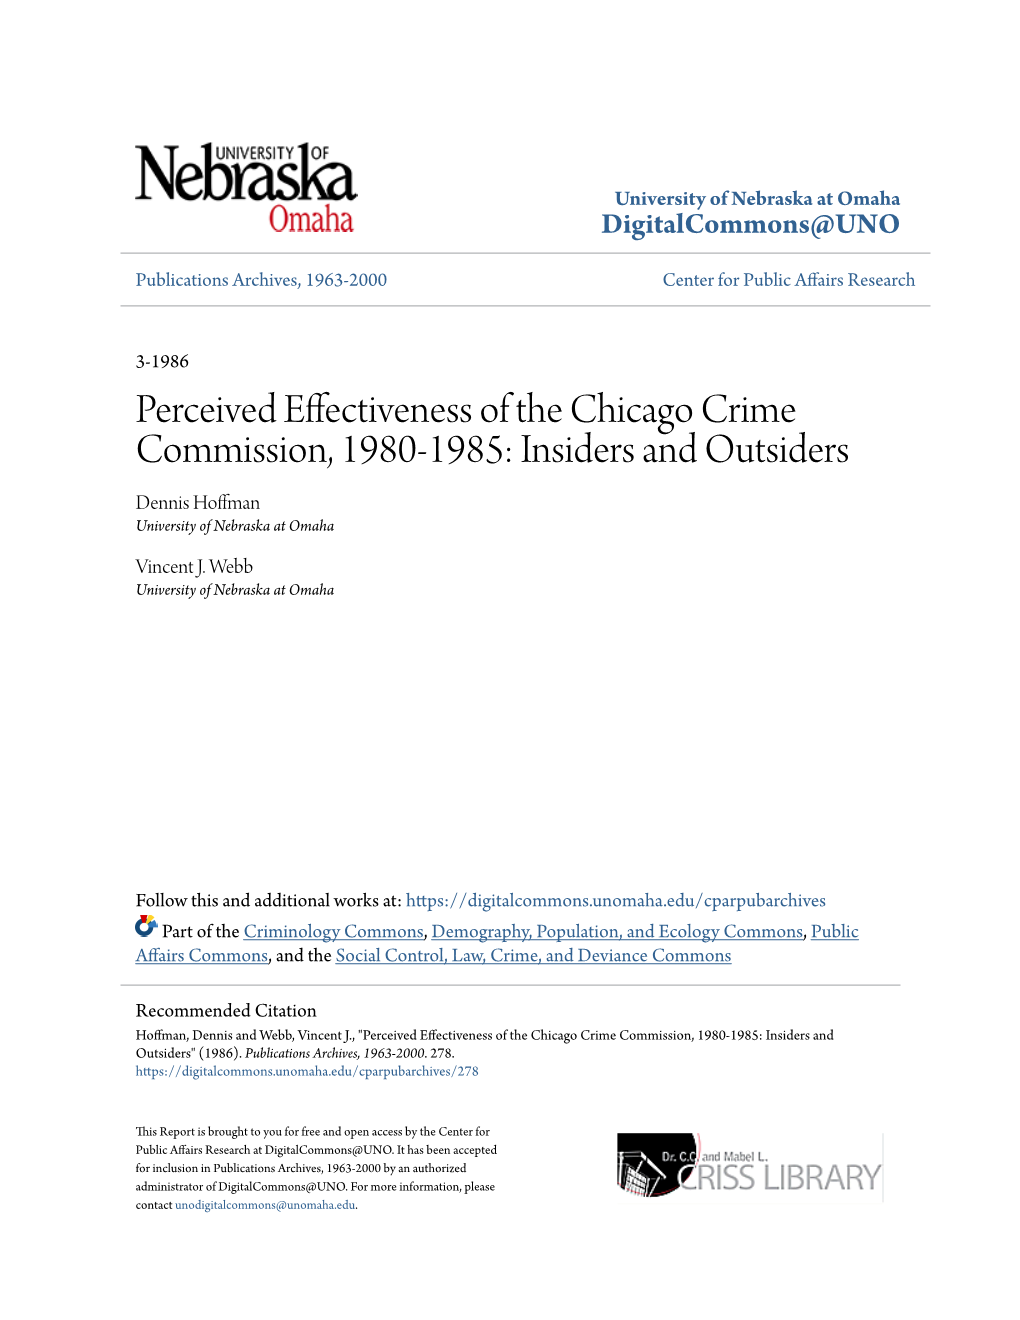 Perceived Effectiveness of the Chicago Crime Commission, 1980-1985: Insiders and Outsiders Dennis Hoffman University of Nebraska at Omaha